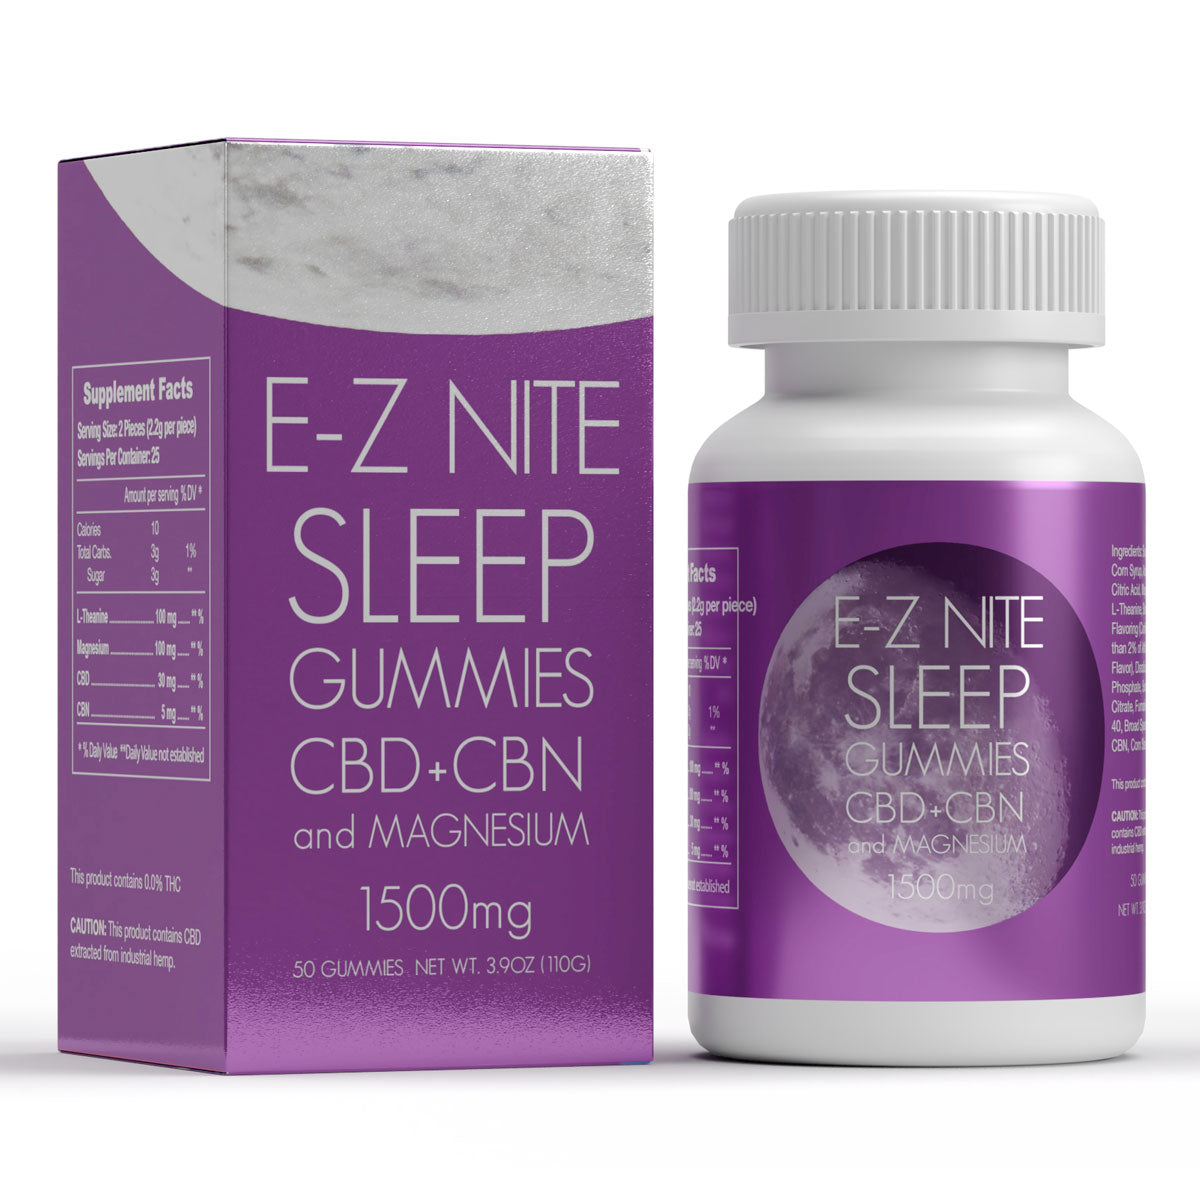 E-Z Nite CBD+CBN with Magnesium and L-Theanine Gummies 1500mg